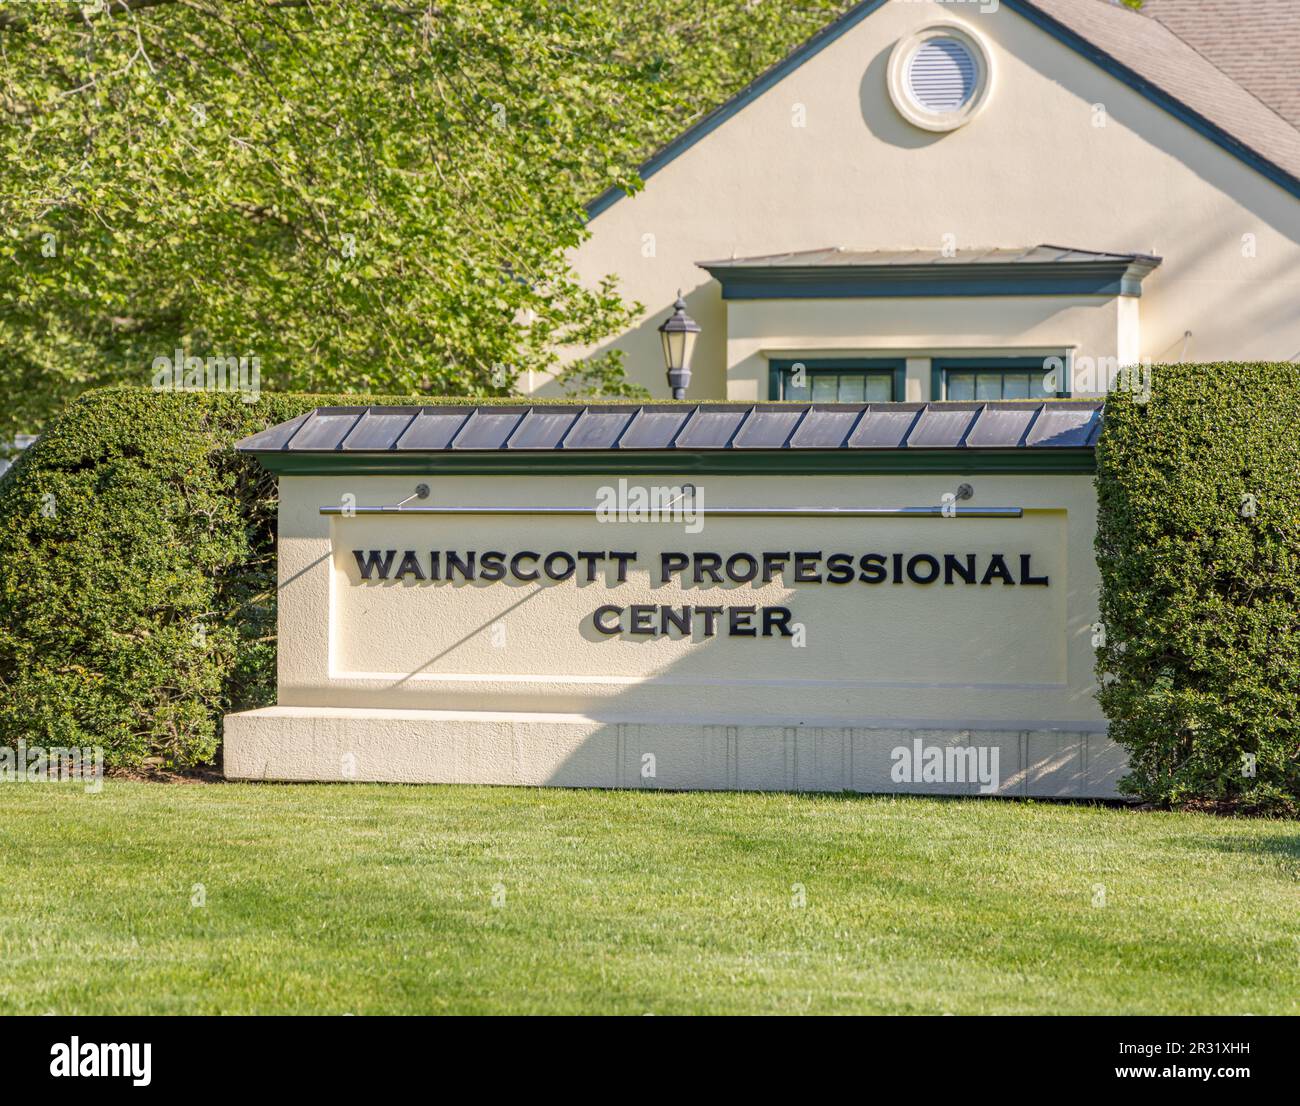 Sign for the Wainscott Professional Center on a summer day Stock Photo